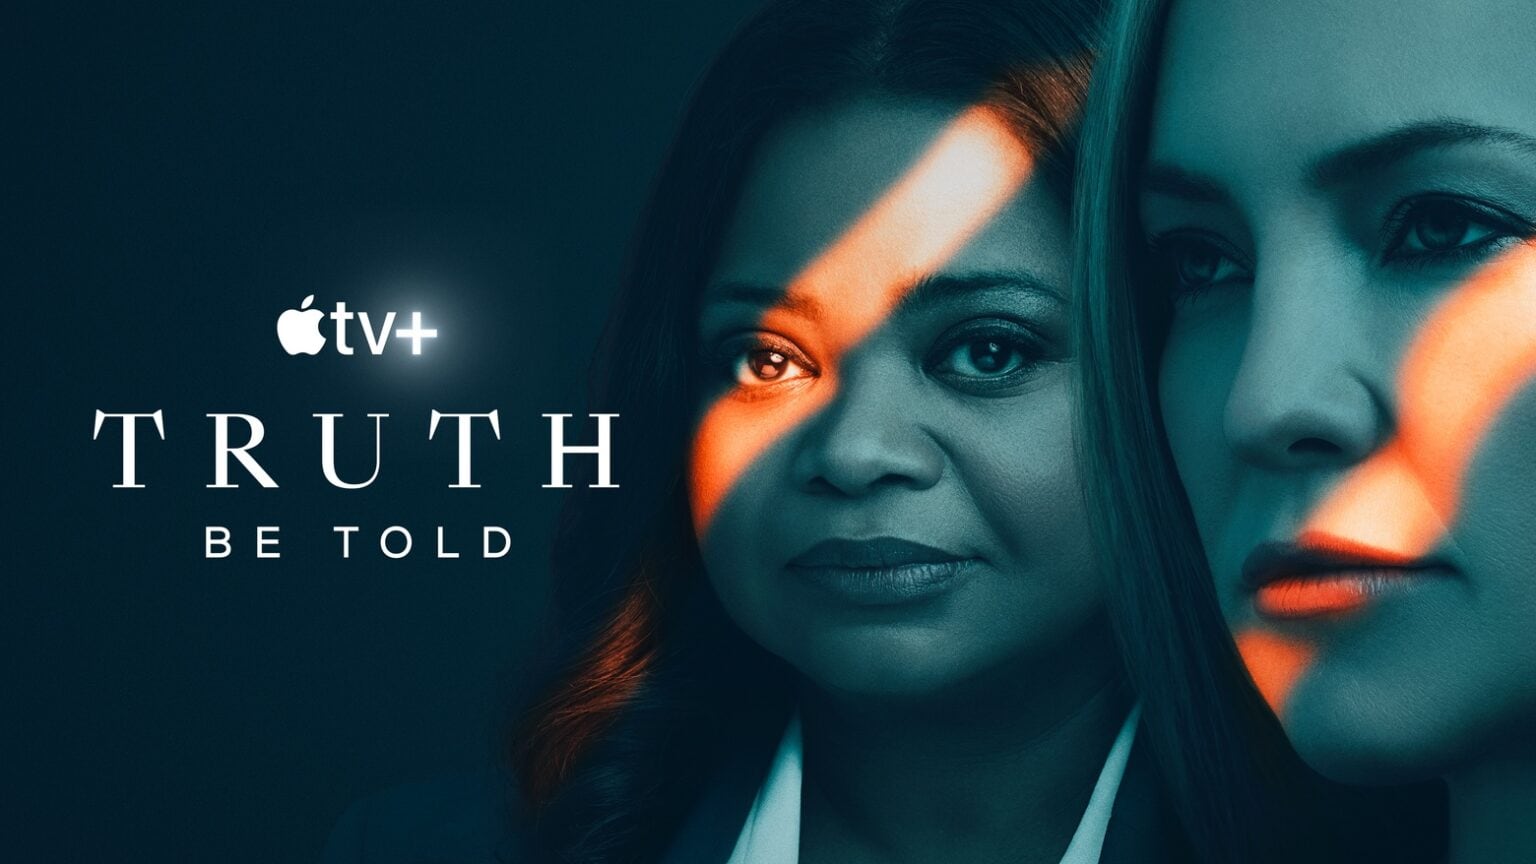 Apple TV+ picks up crime drama ‘Truth Be Told’ for third season